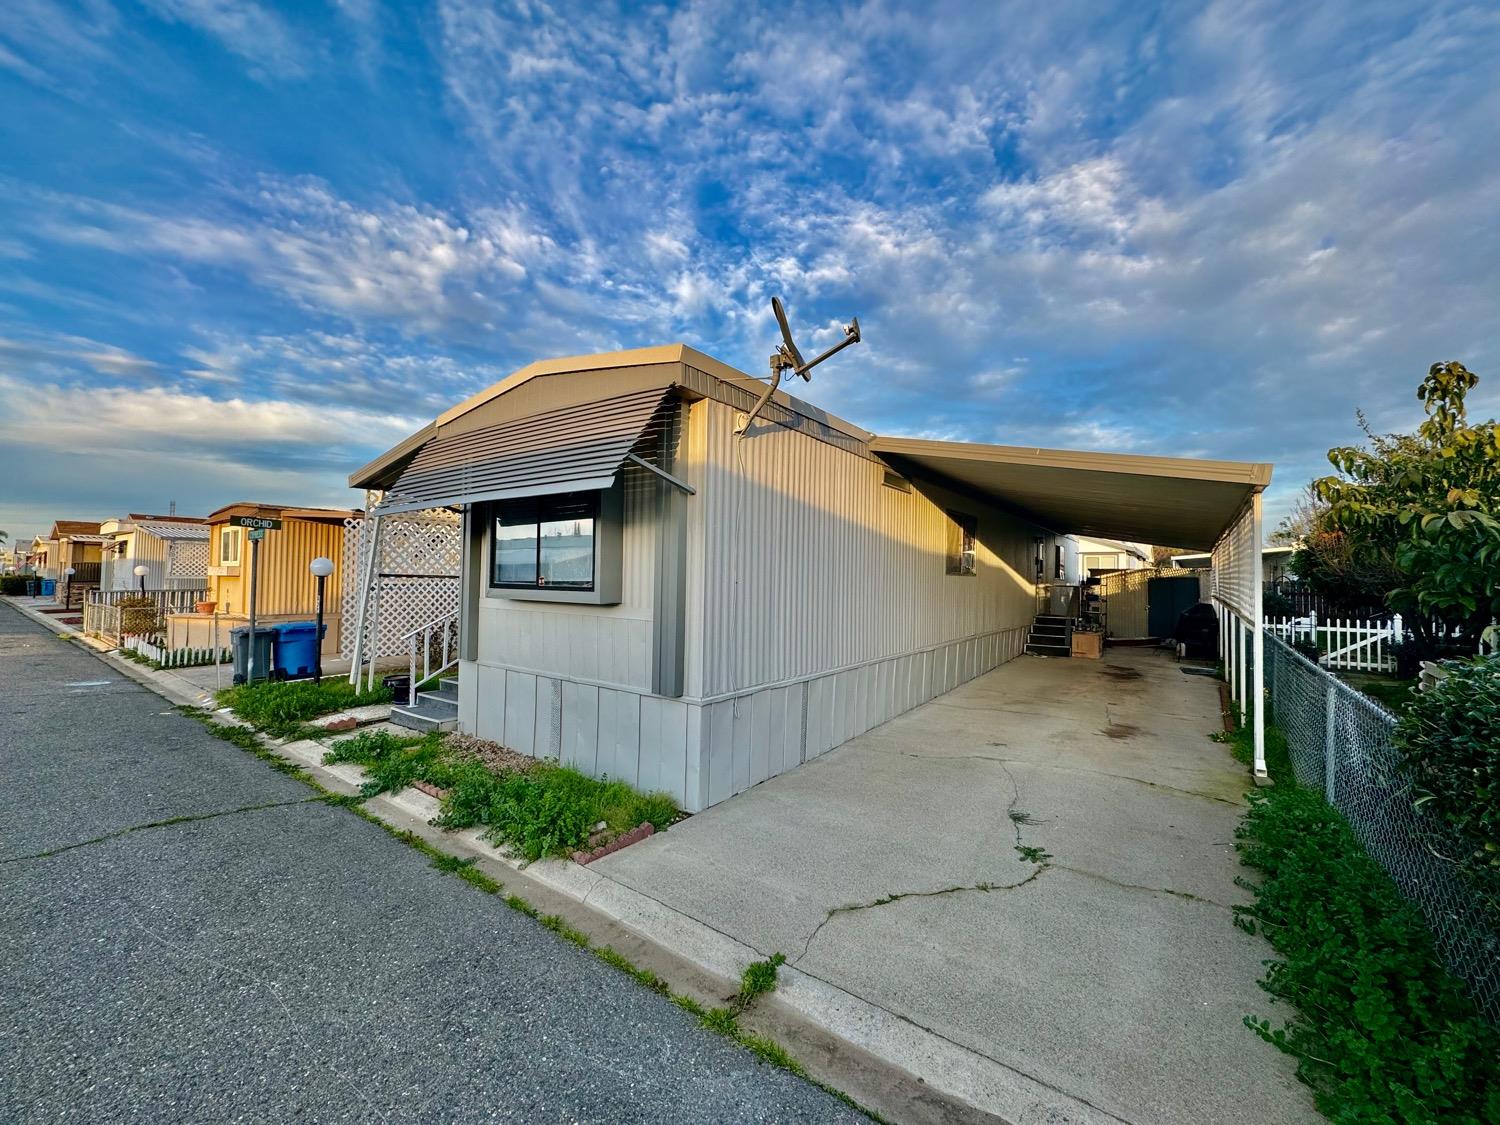 Photo of 1155 Pease Rd #402 in Yuba City, CA